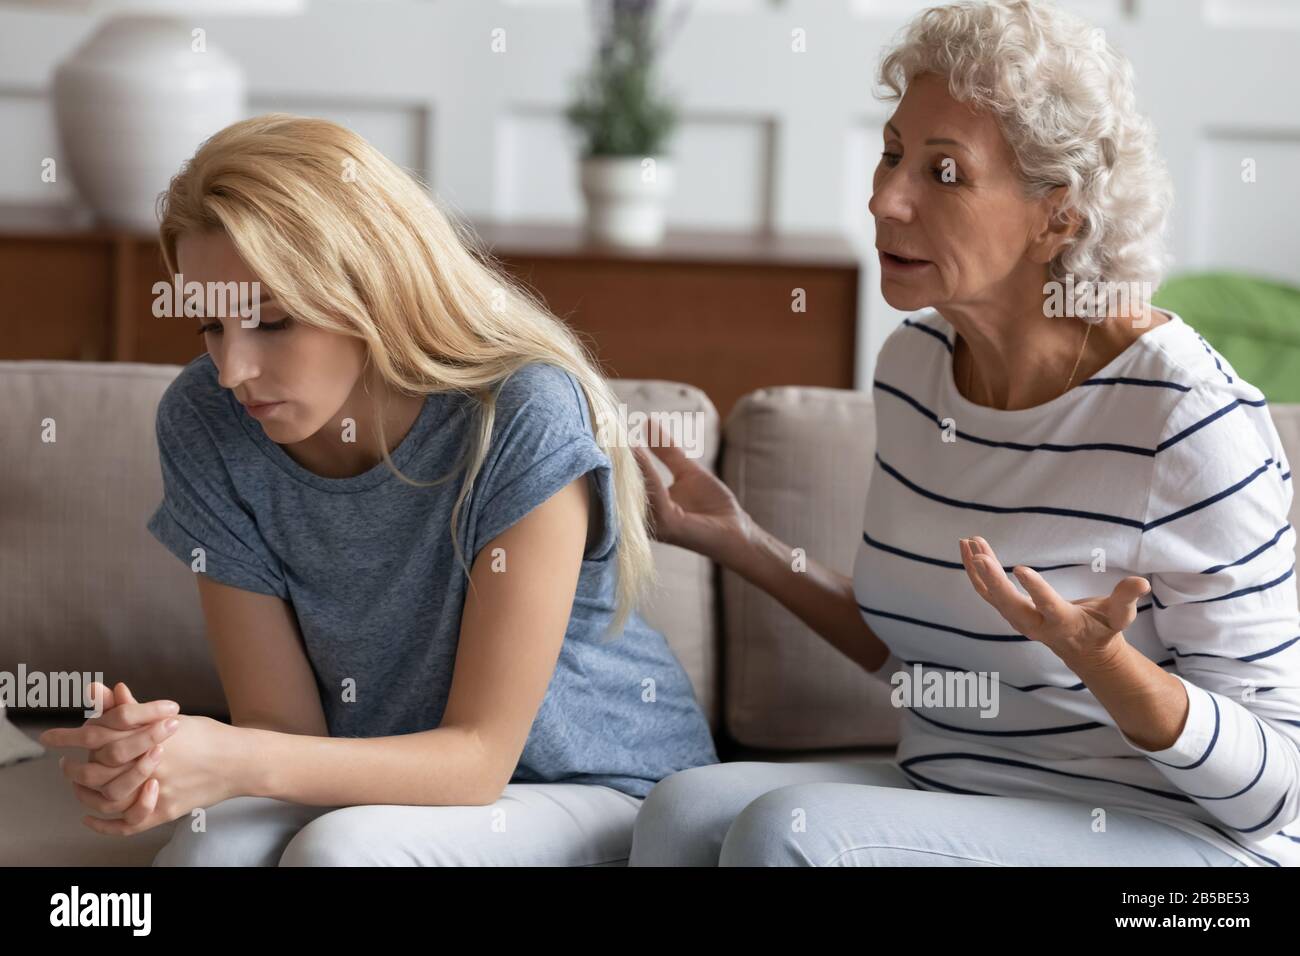 Pushy mature mother talk lecture distressed adult daughter Stock Photo